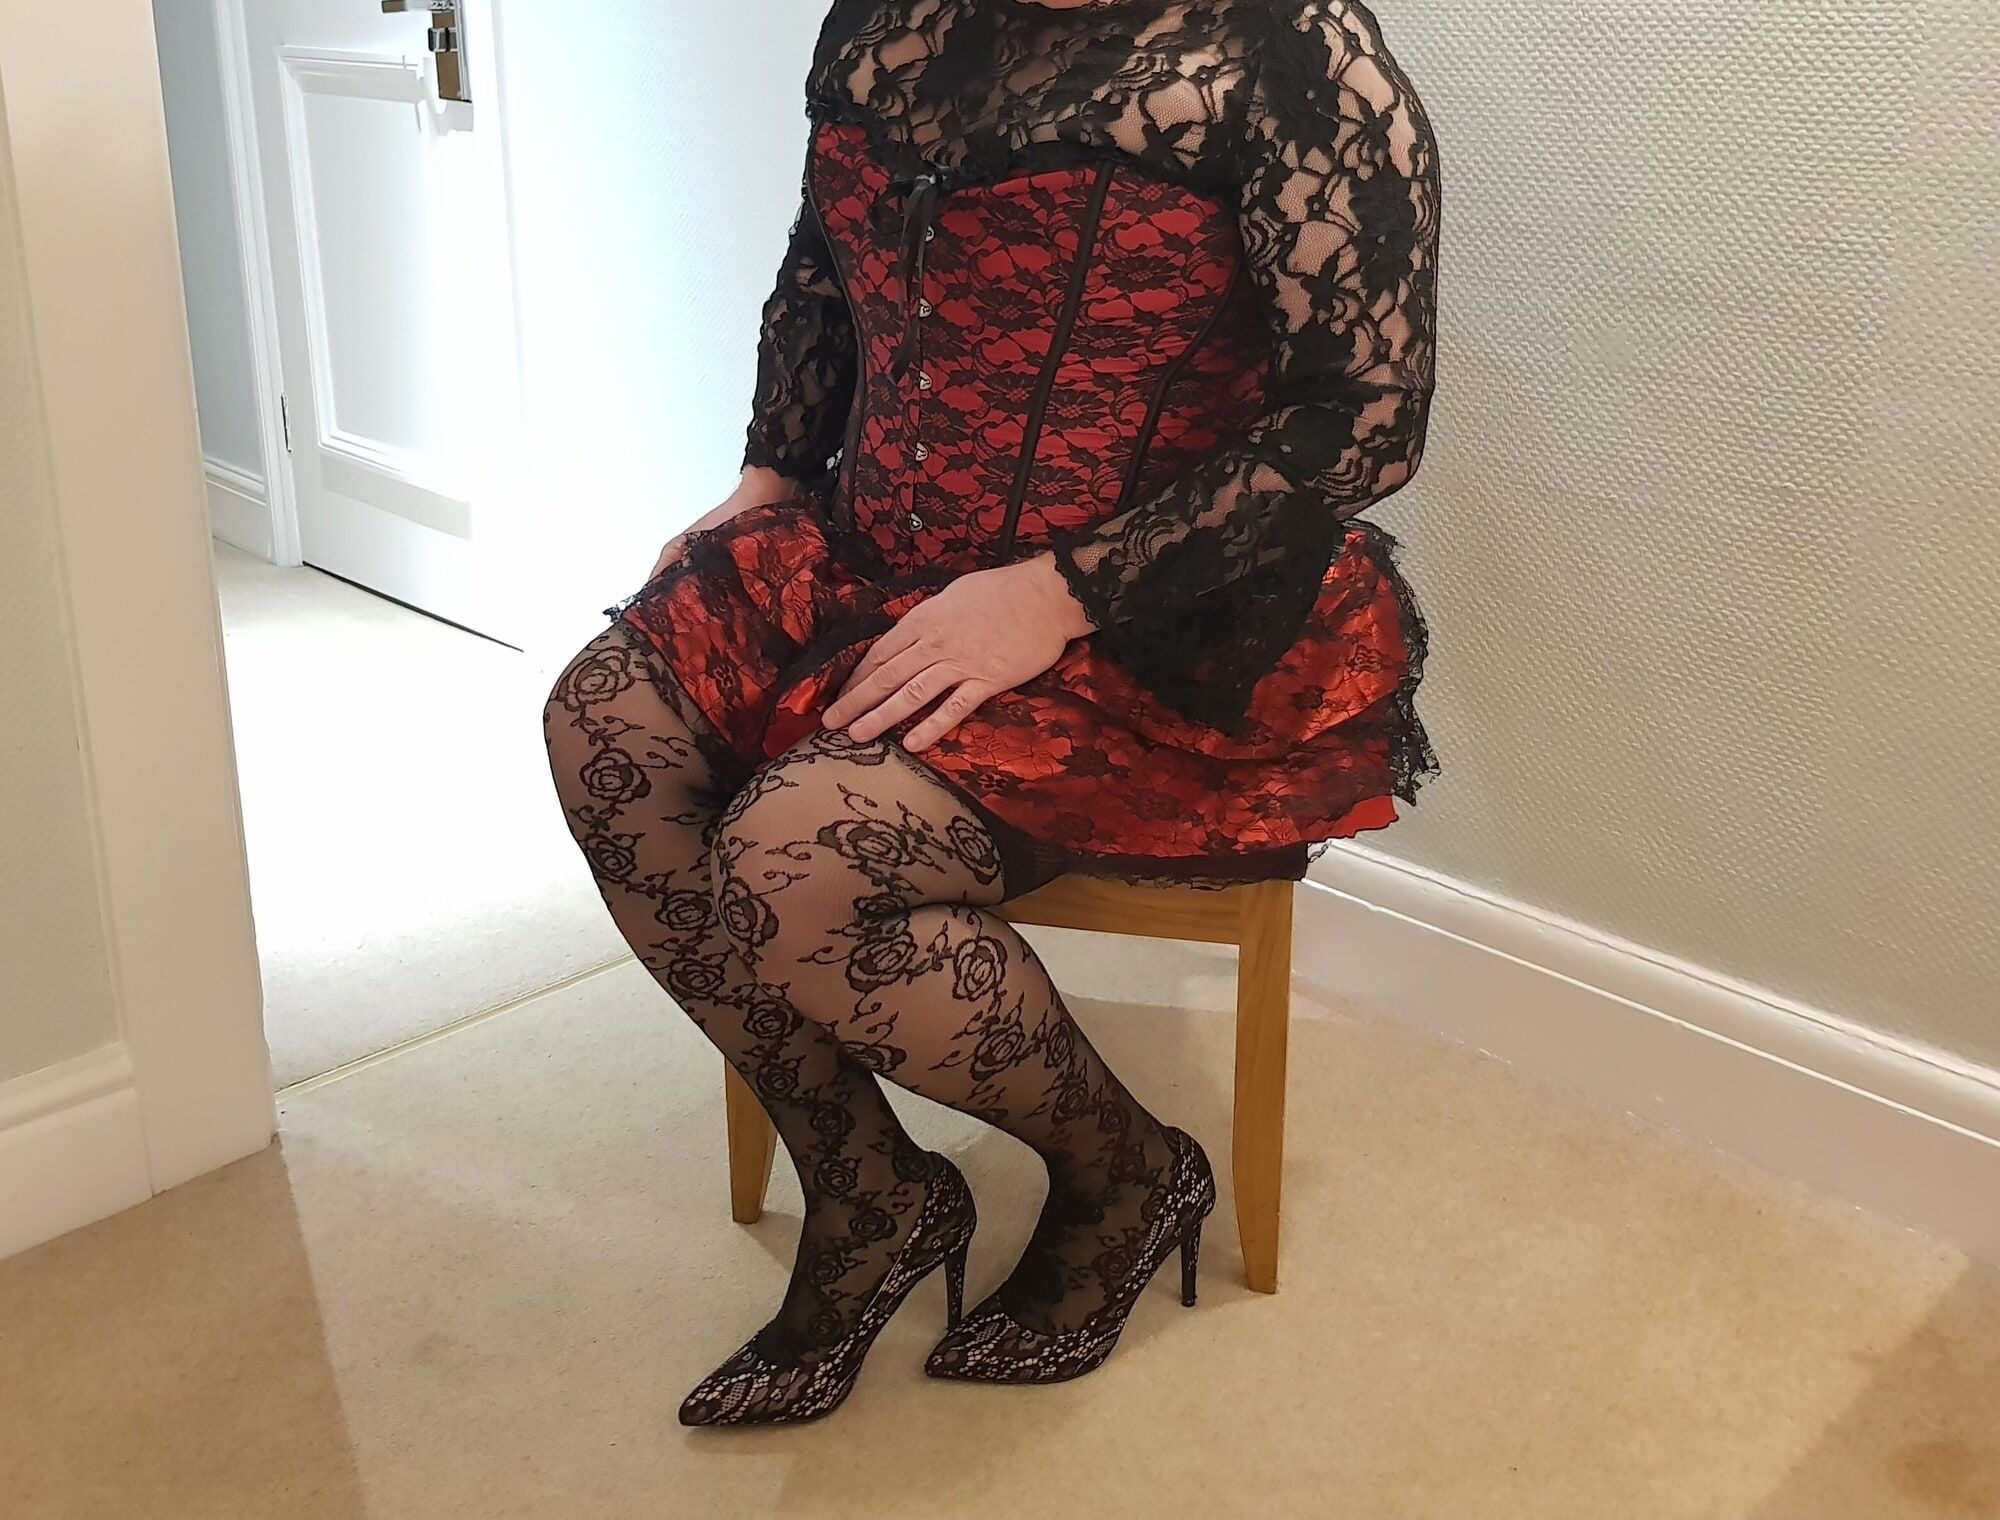 Crossdressing in floral lace lingerie, skirt and heels